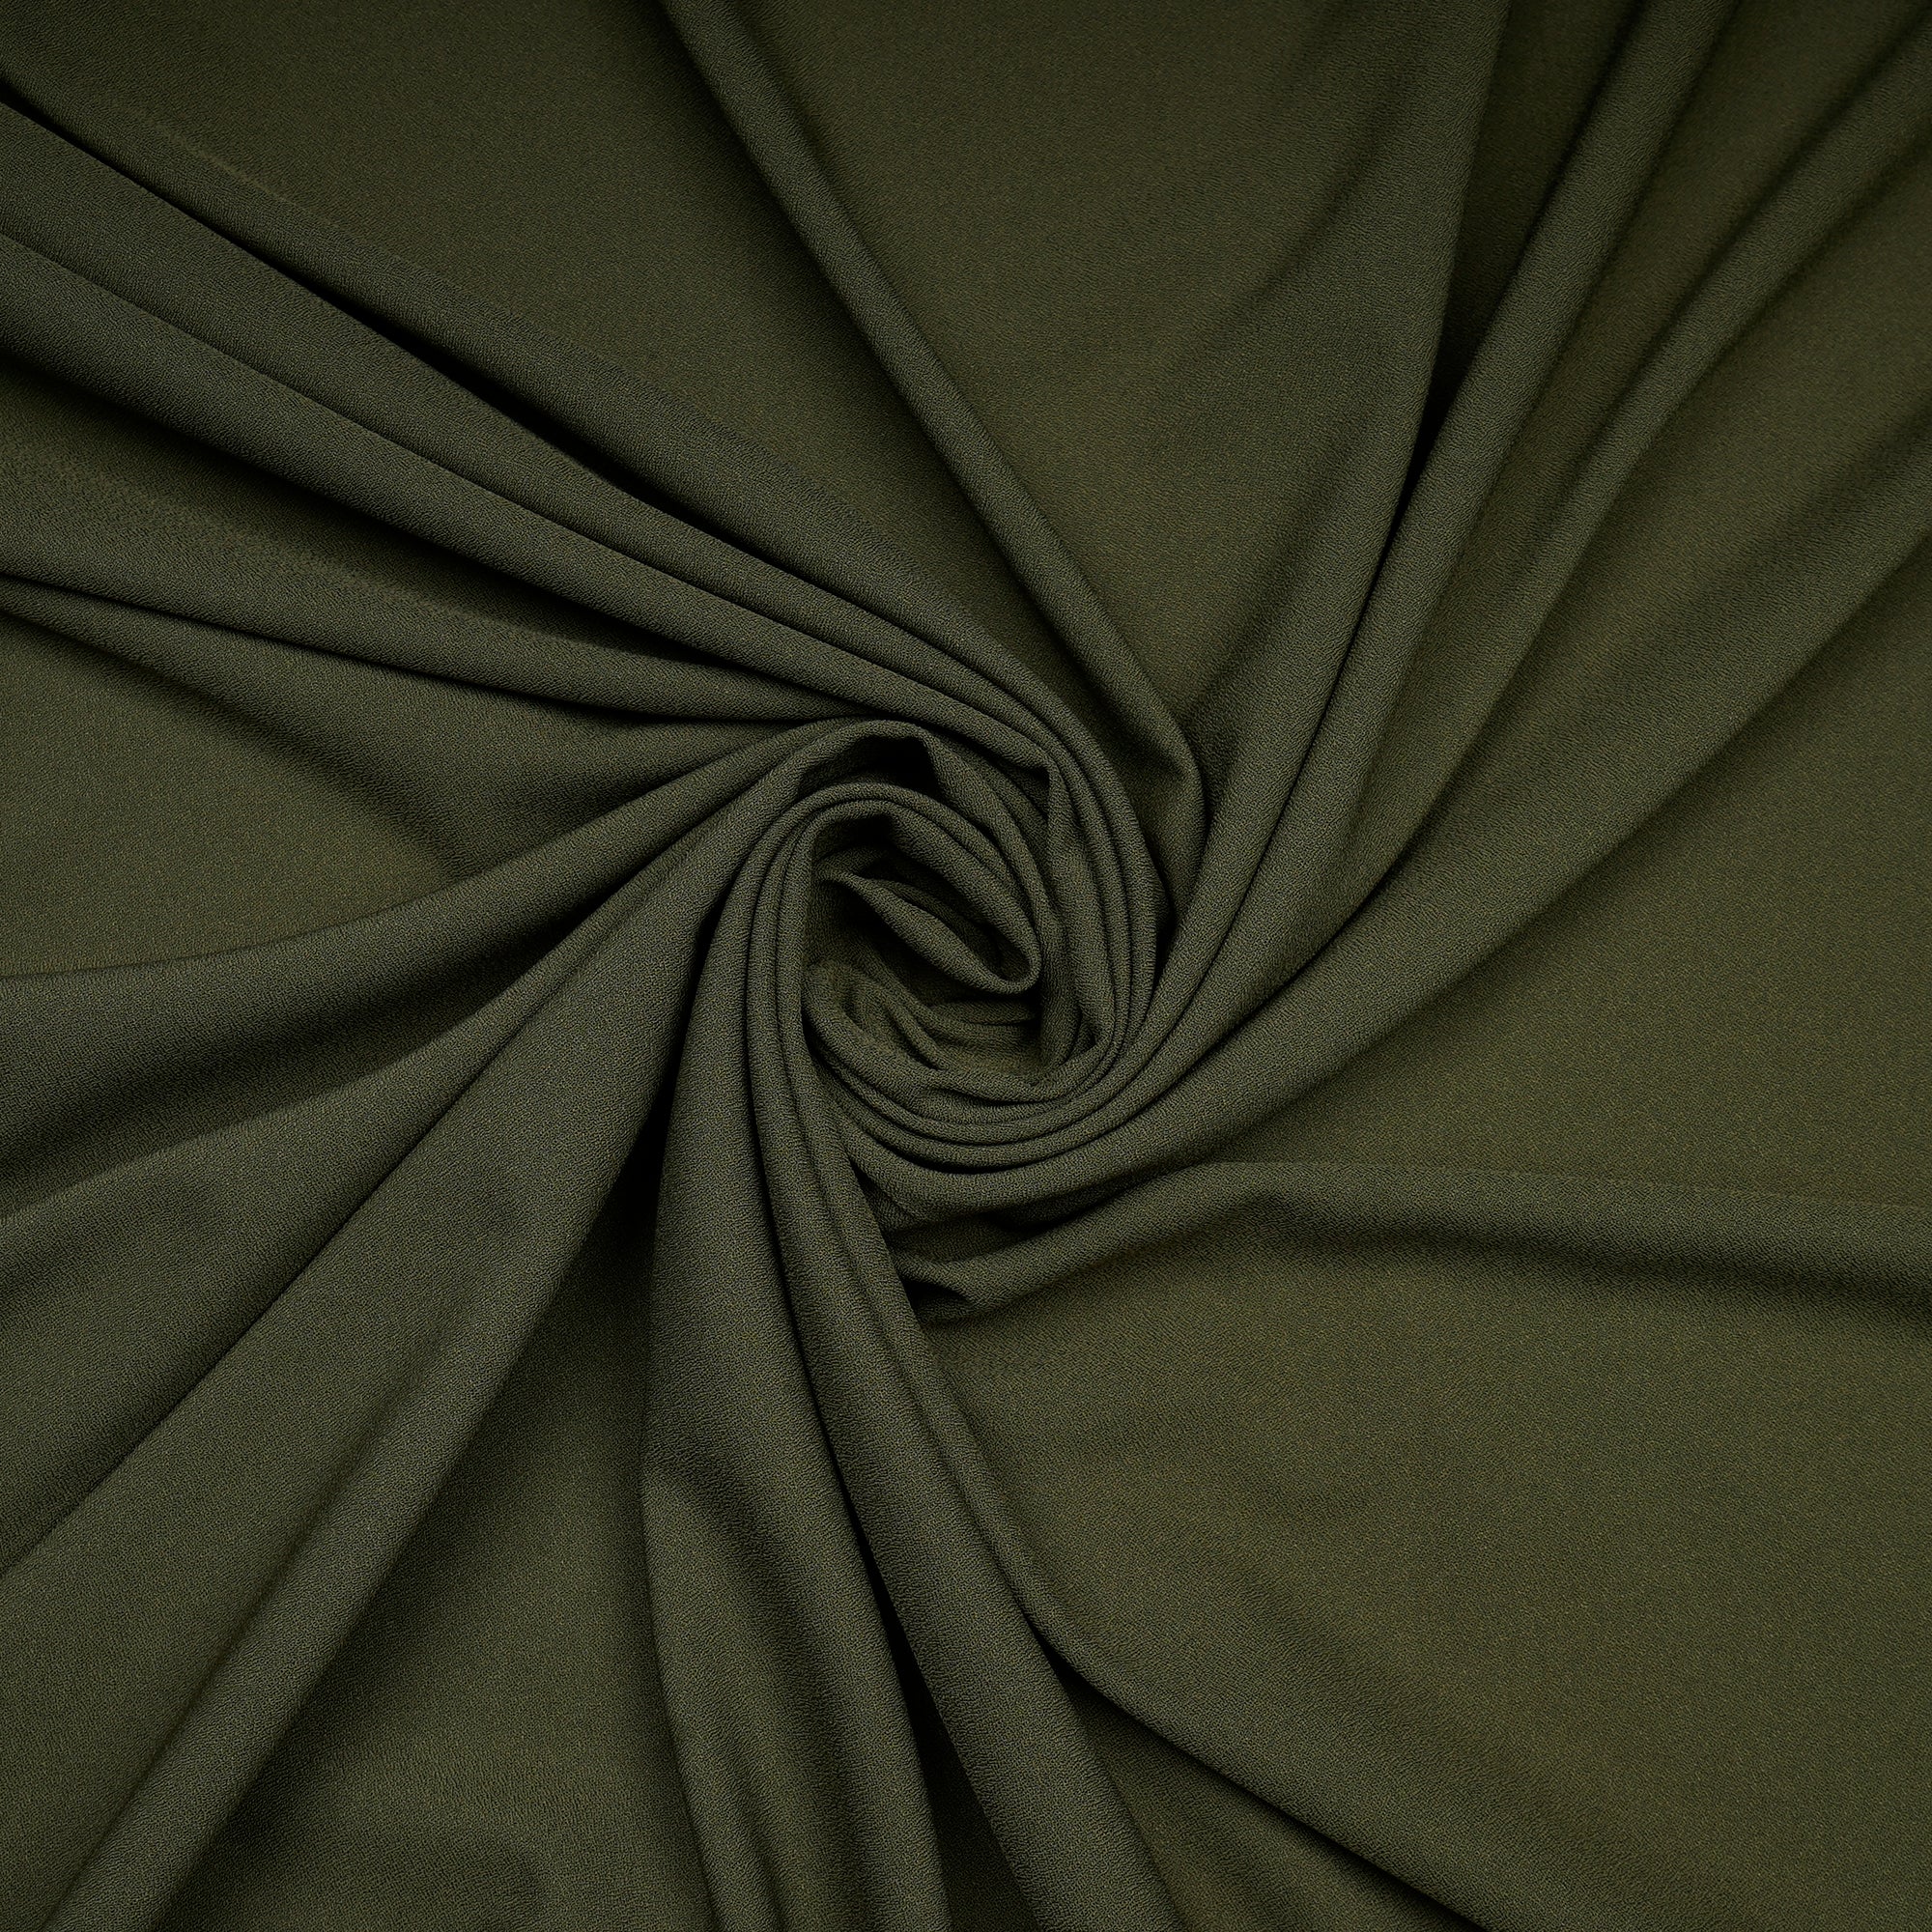 Lvy Green Solid Dyed Imported Moss Crepe Fabric (60" Width)